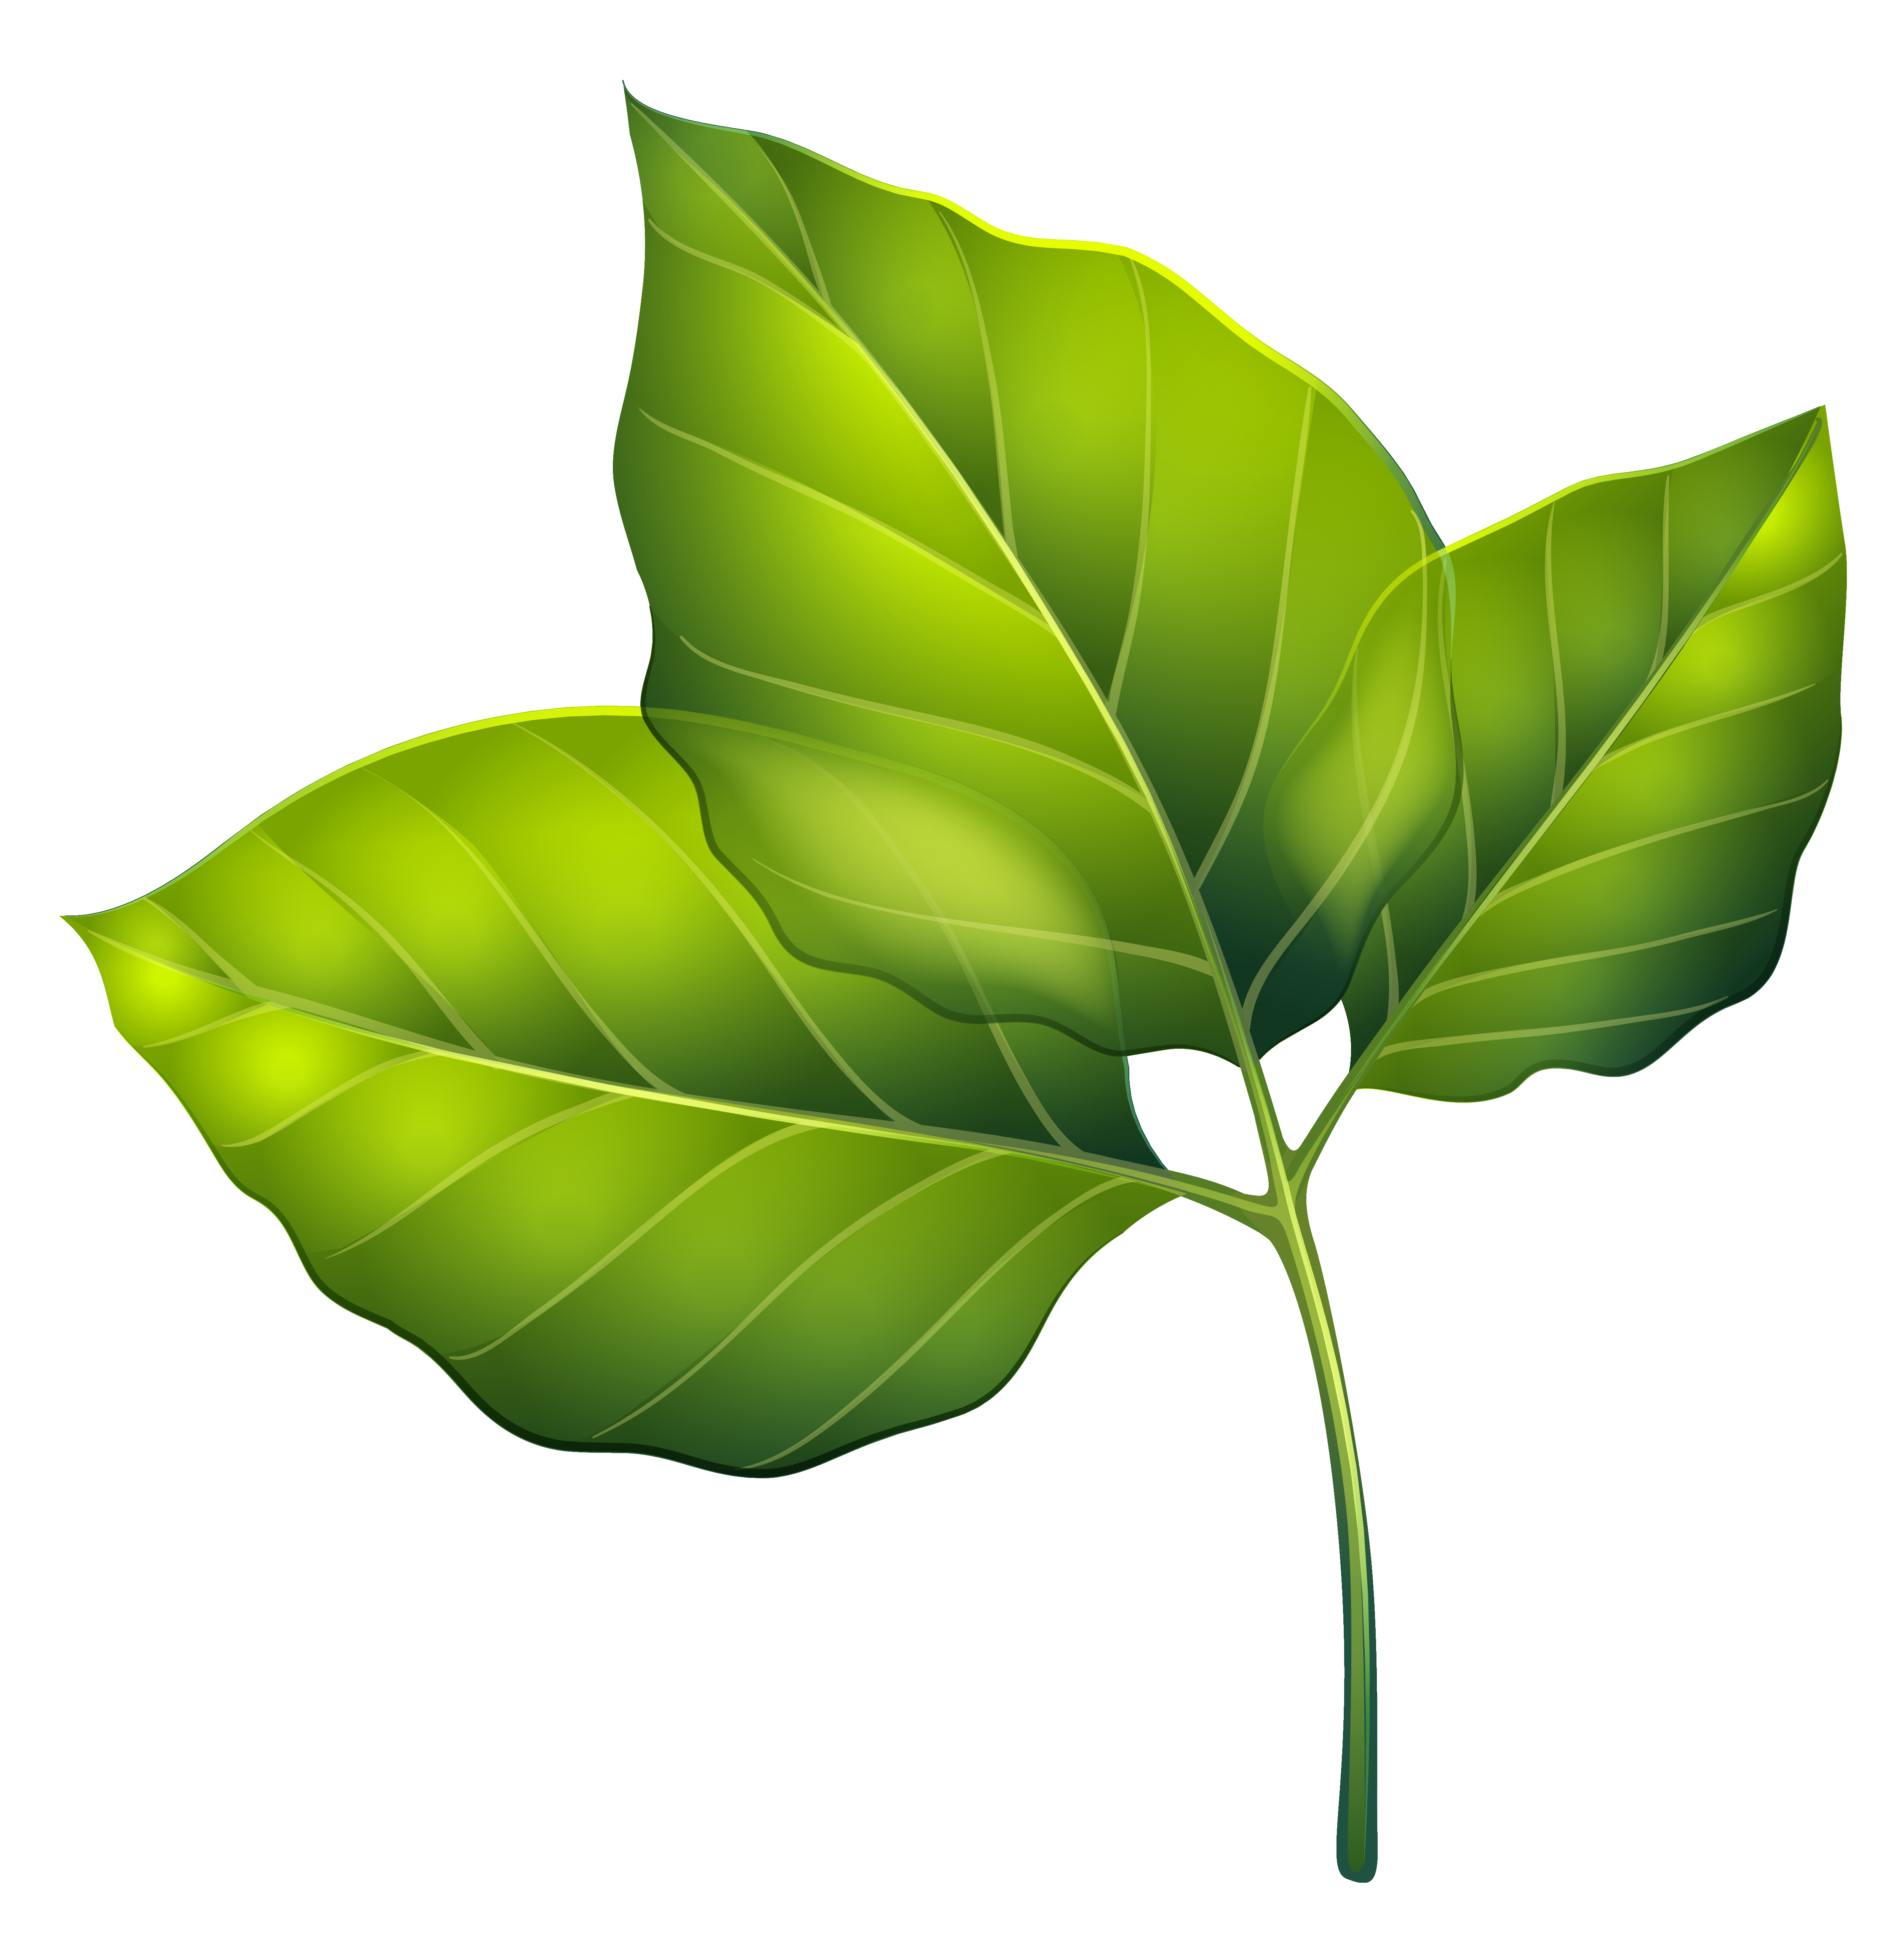 Greenleaves clipart - Clipground